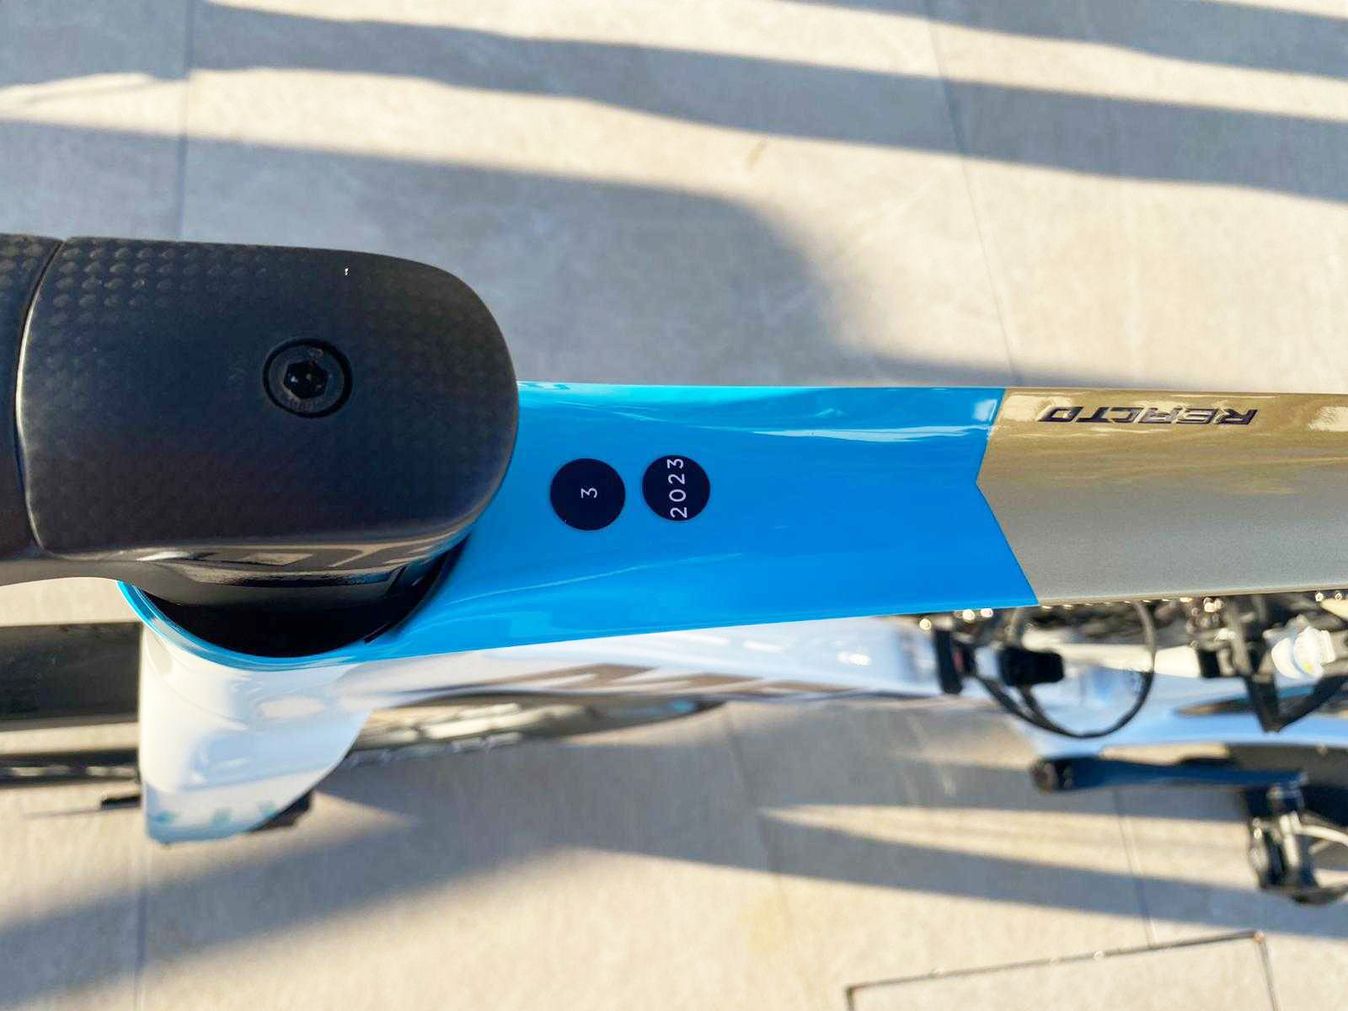 The gold and blue design on the top tube